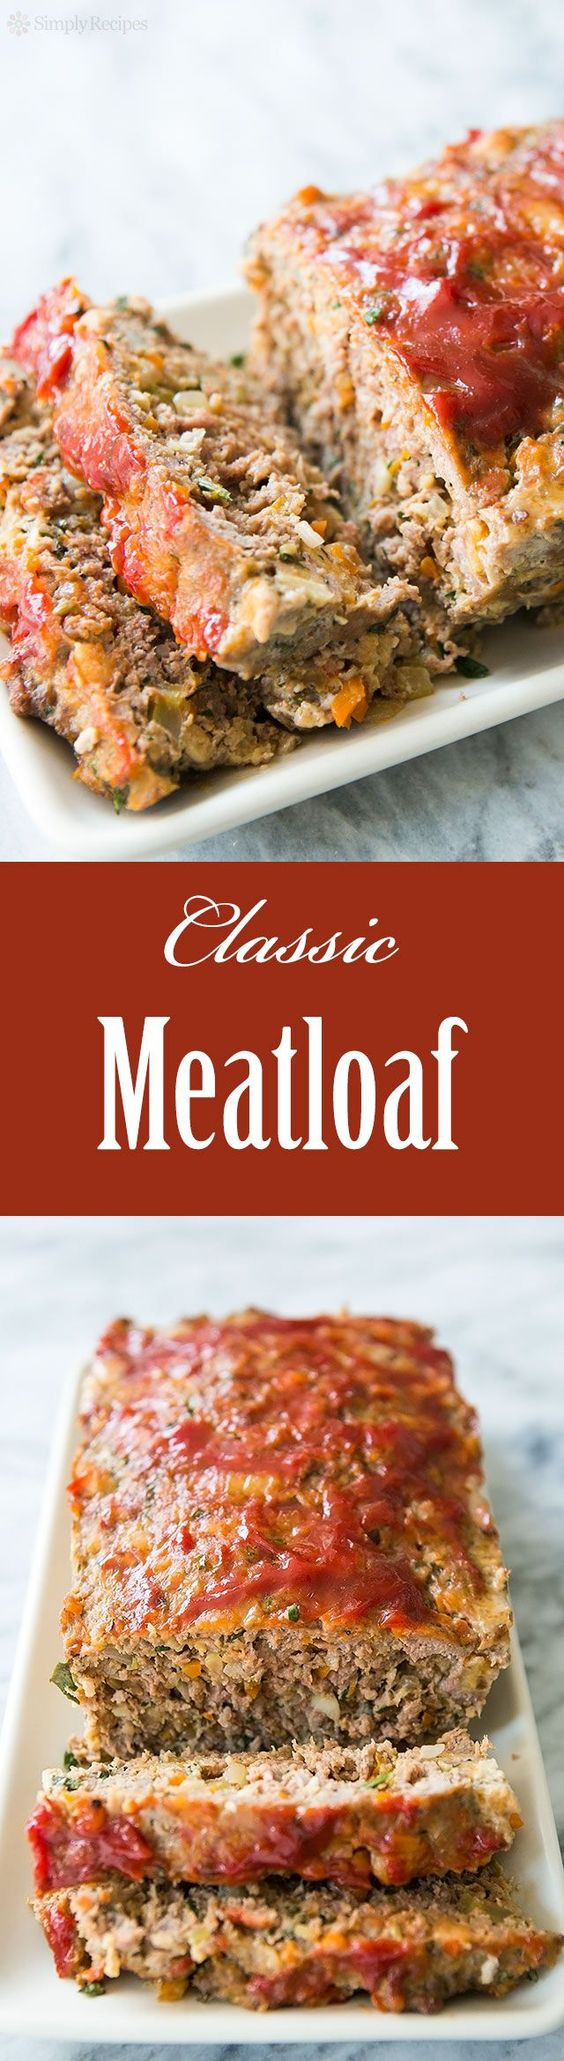 Meatloaf Recipe With Bread Crumbs
 Pinterest • The world’s catalog of ideas